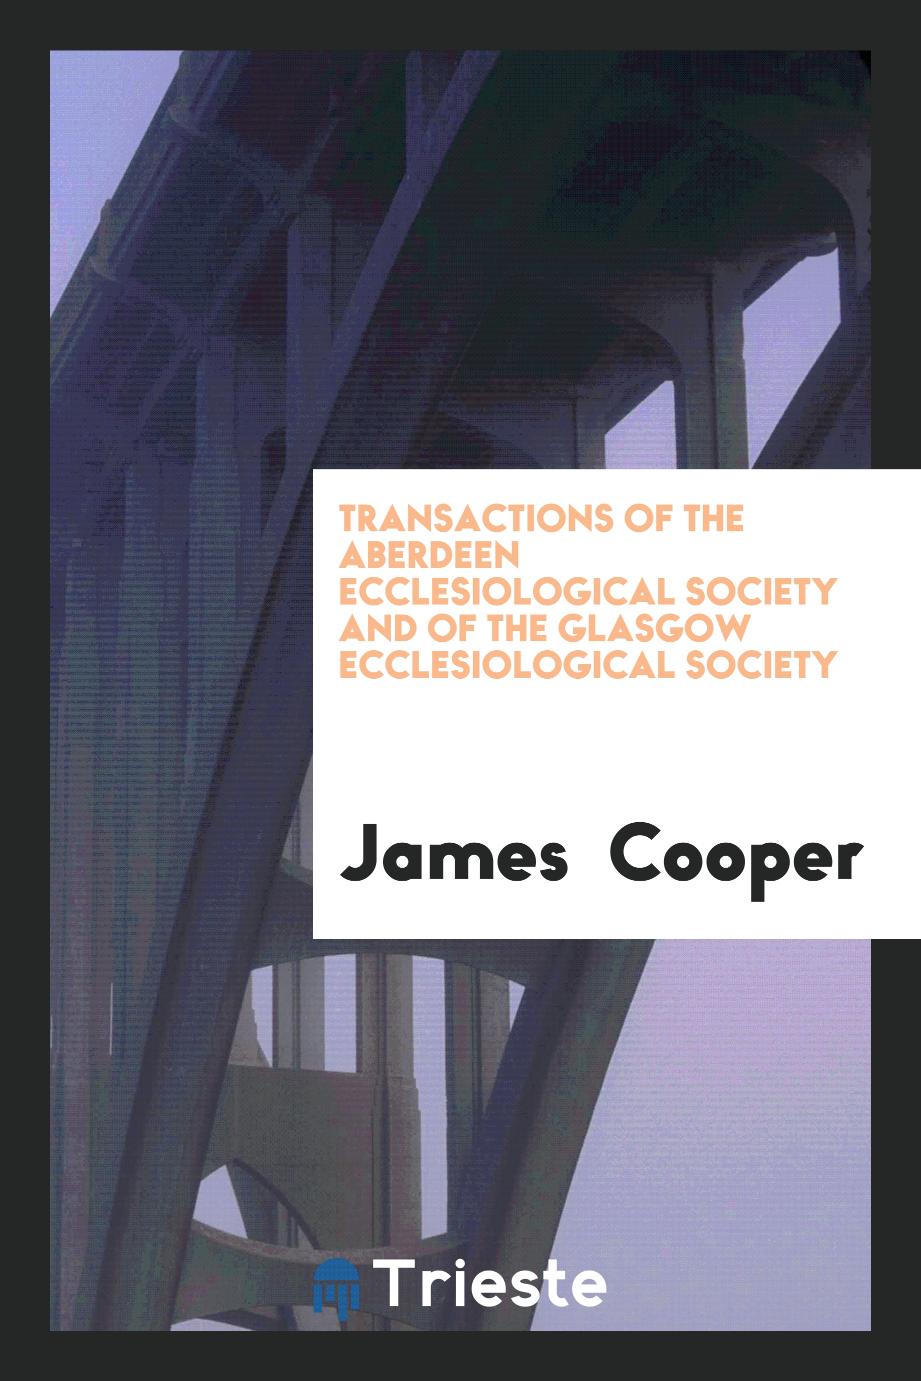 Transactions of the Aberdeen Ecclesiological Society and of the Glasgow Ecclesiological Society